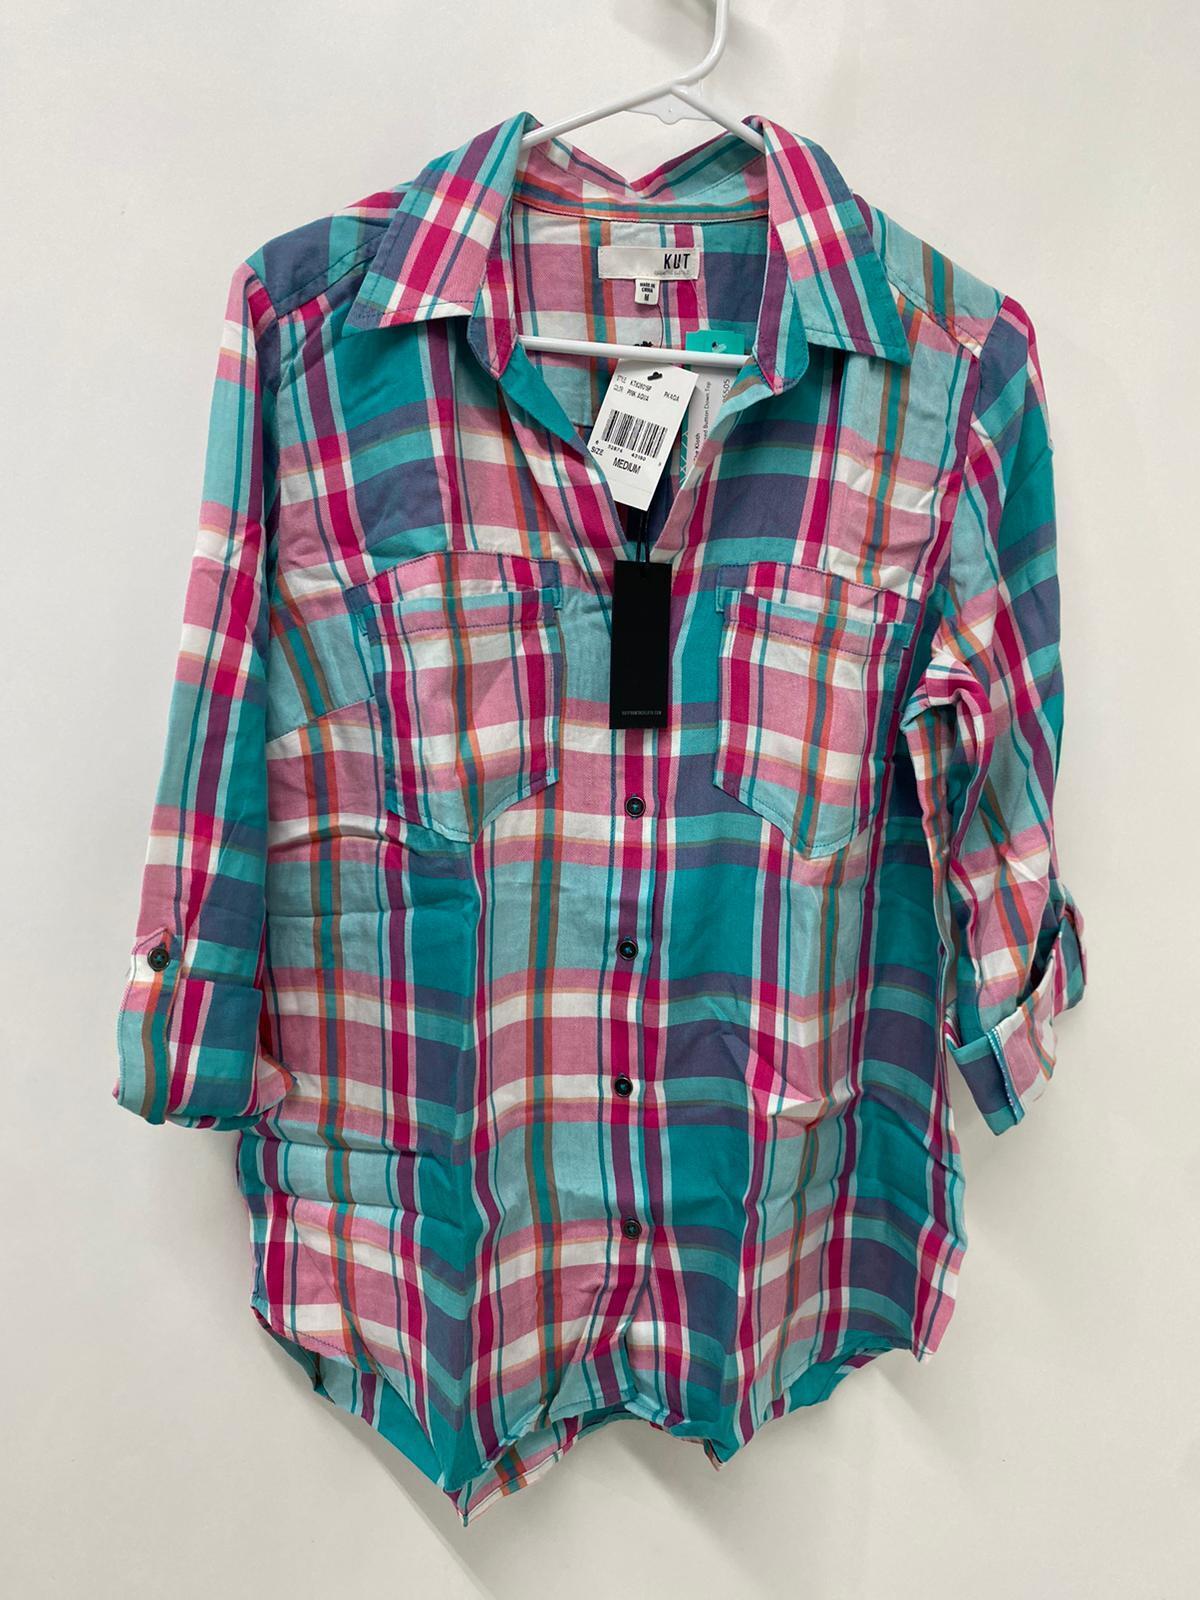 Kut from the Kloth Womens M Caillen Flannel Relaxed Button Down Shirt Plaid